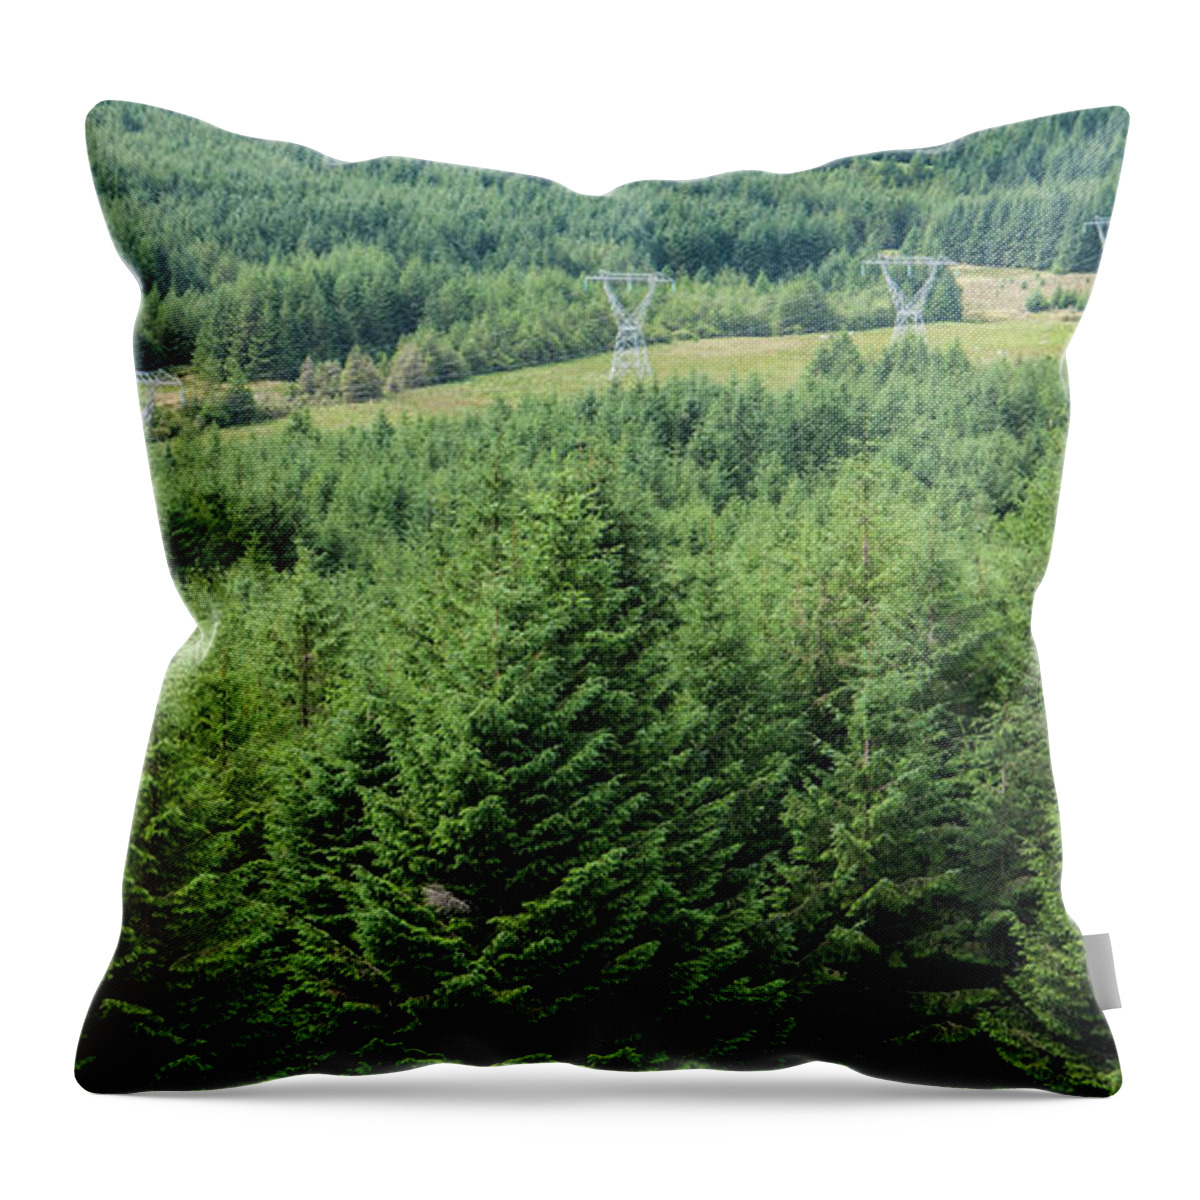 Scenics Throw Pillow featuring the photograph Woodland And Technology by Leverstock